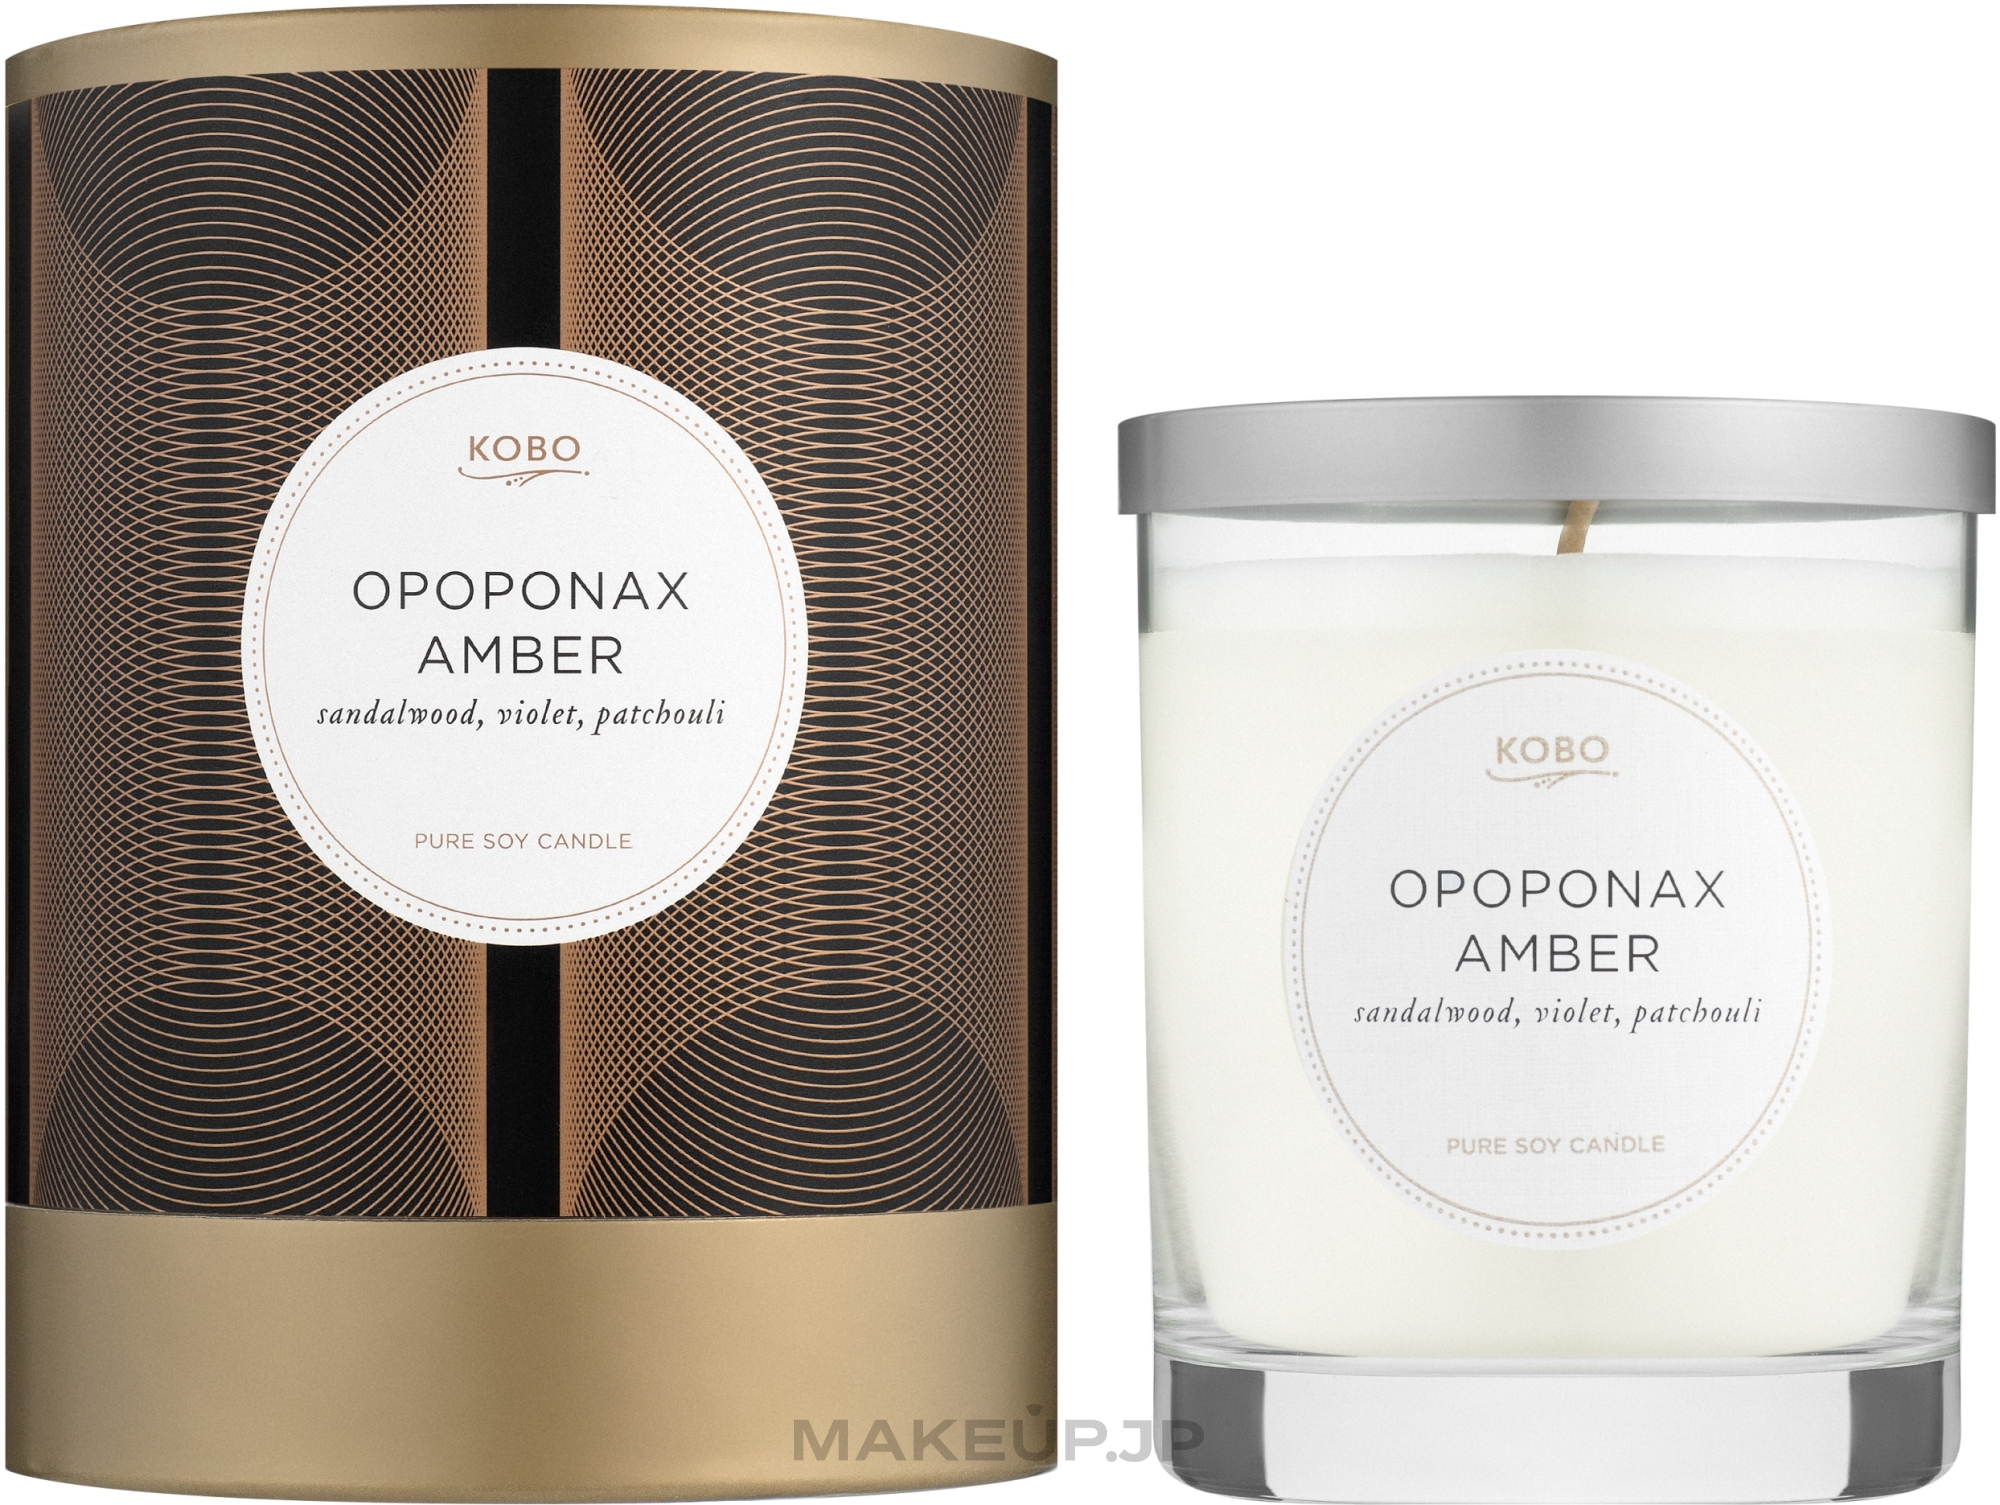 Kobo Opoponax Amber - Scented Candle — photo 312 g